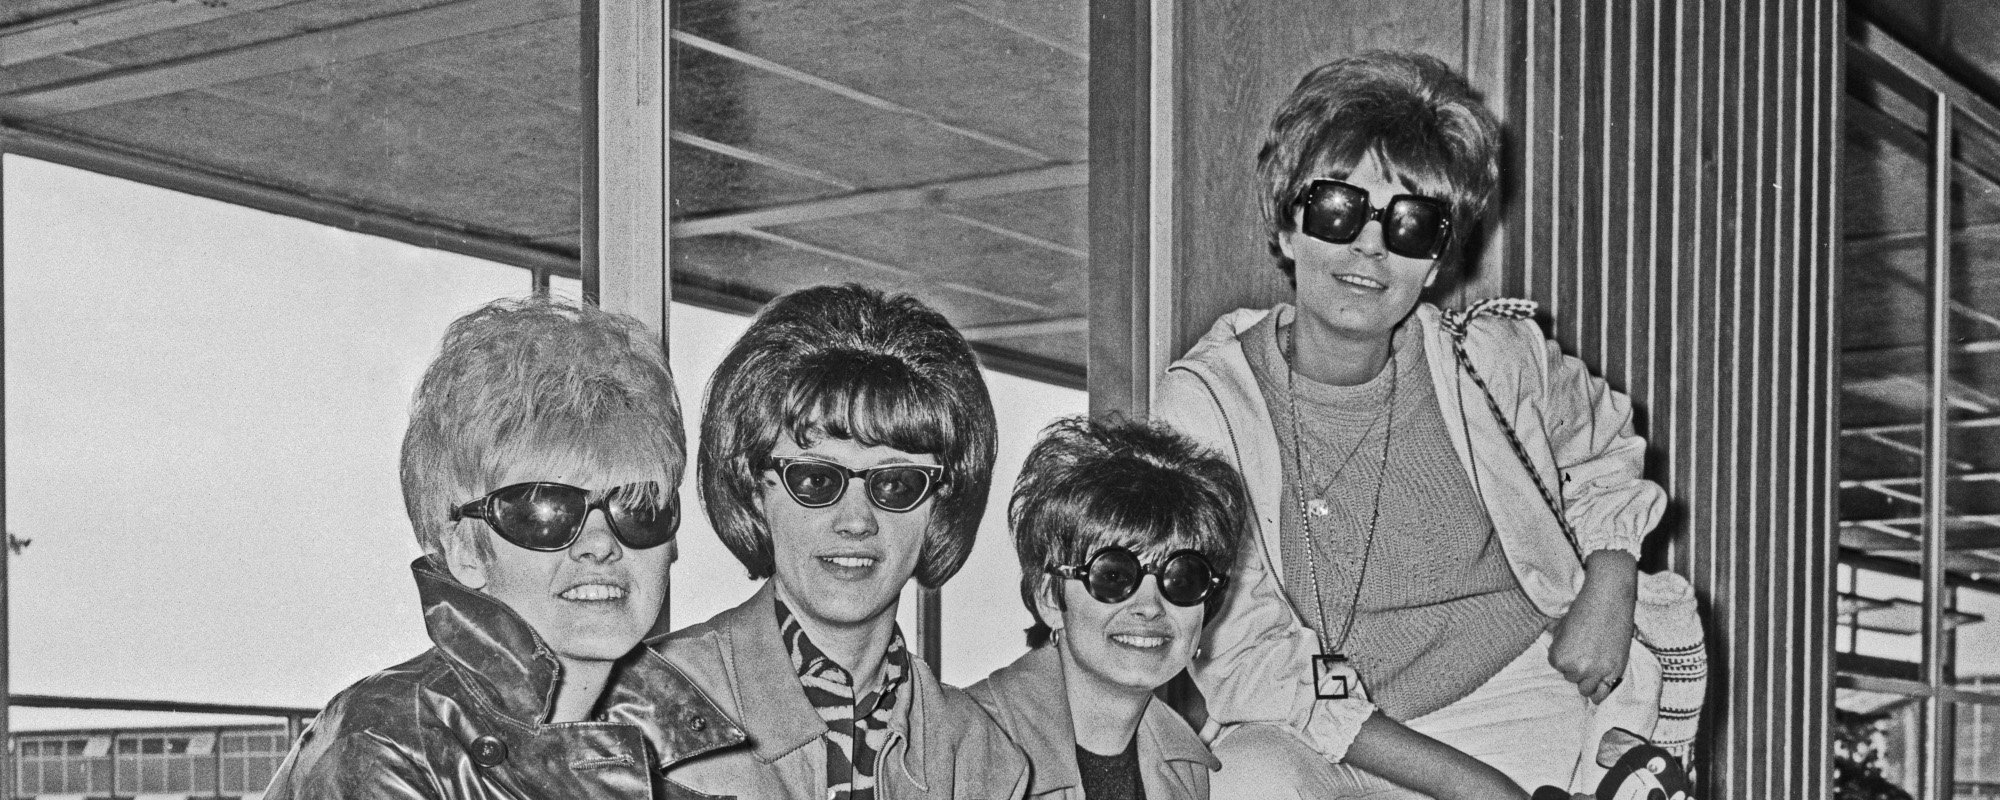 The 6 Best Female Rock Bands of the 1960s